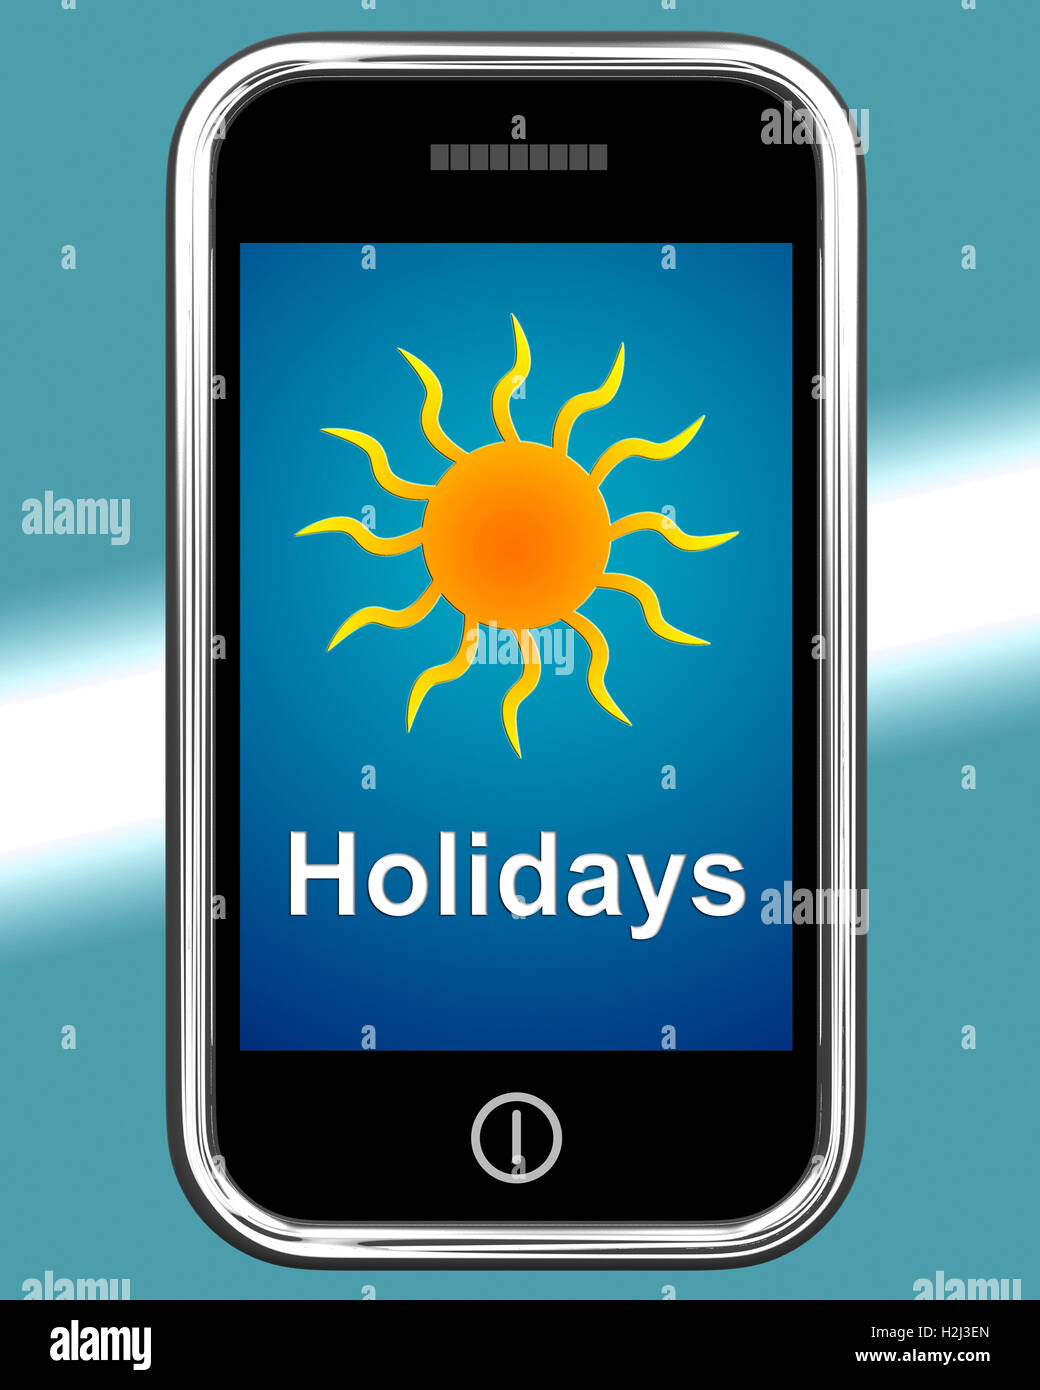 Holidays On Phone Means Vacation Leave Or Break Stock Photo